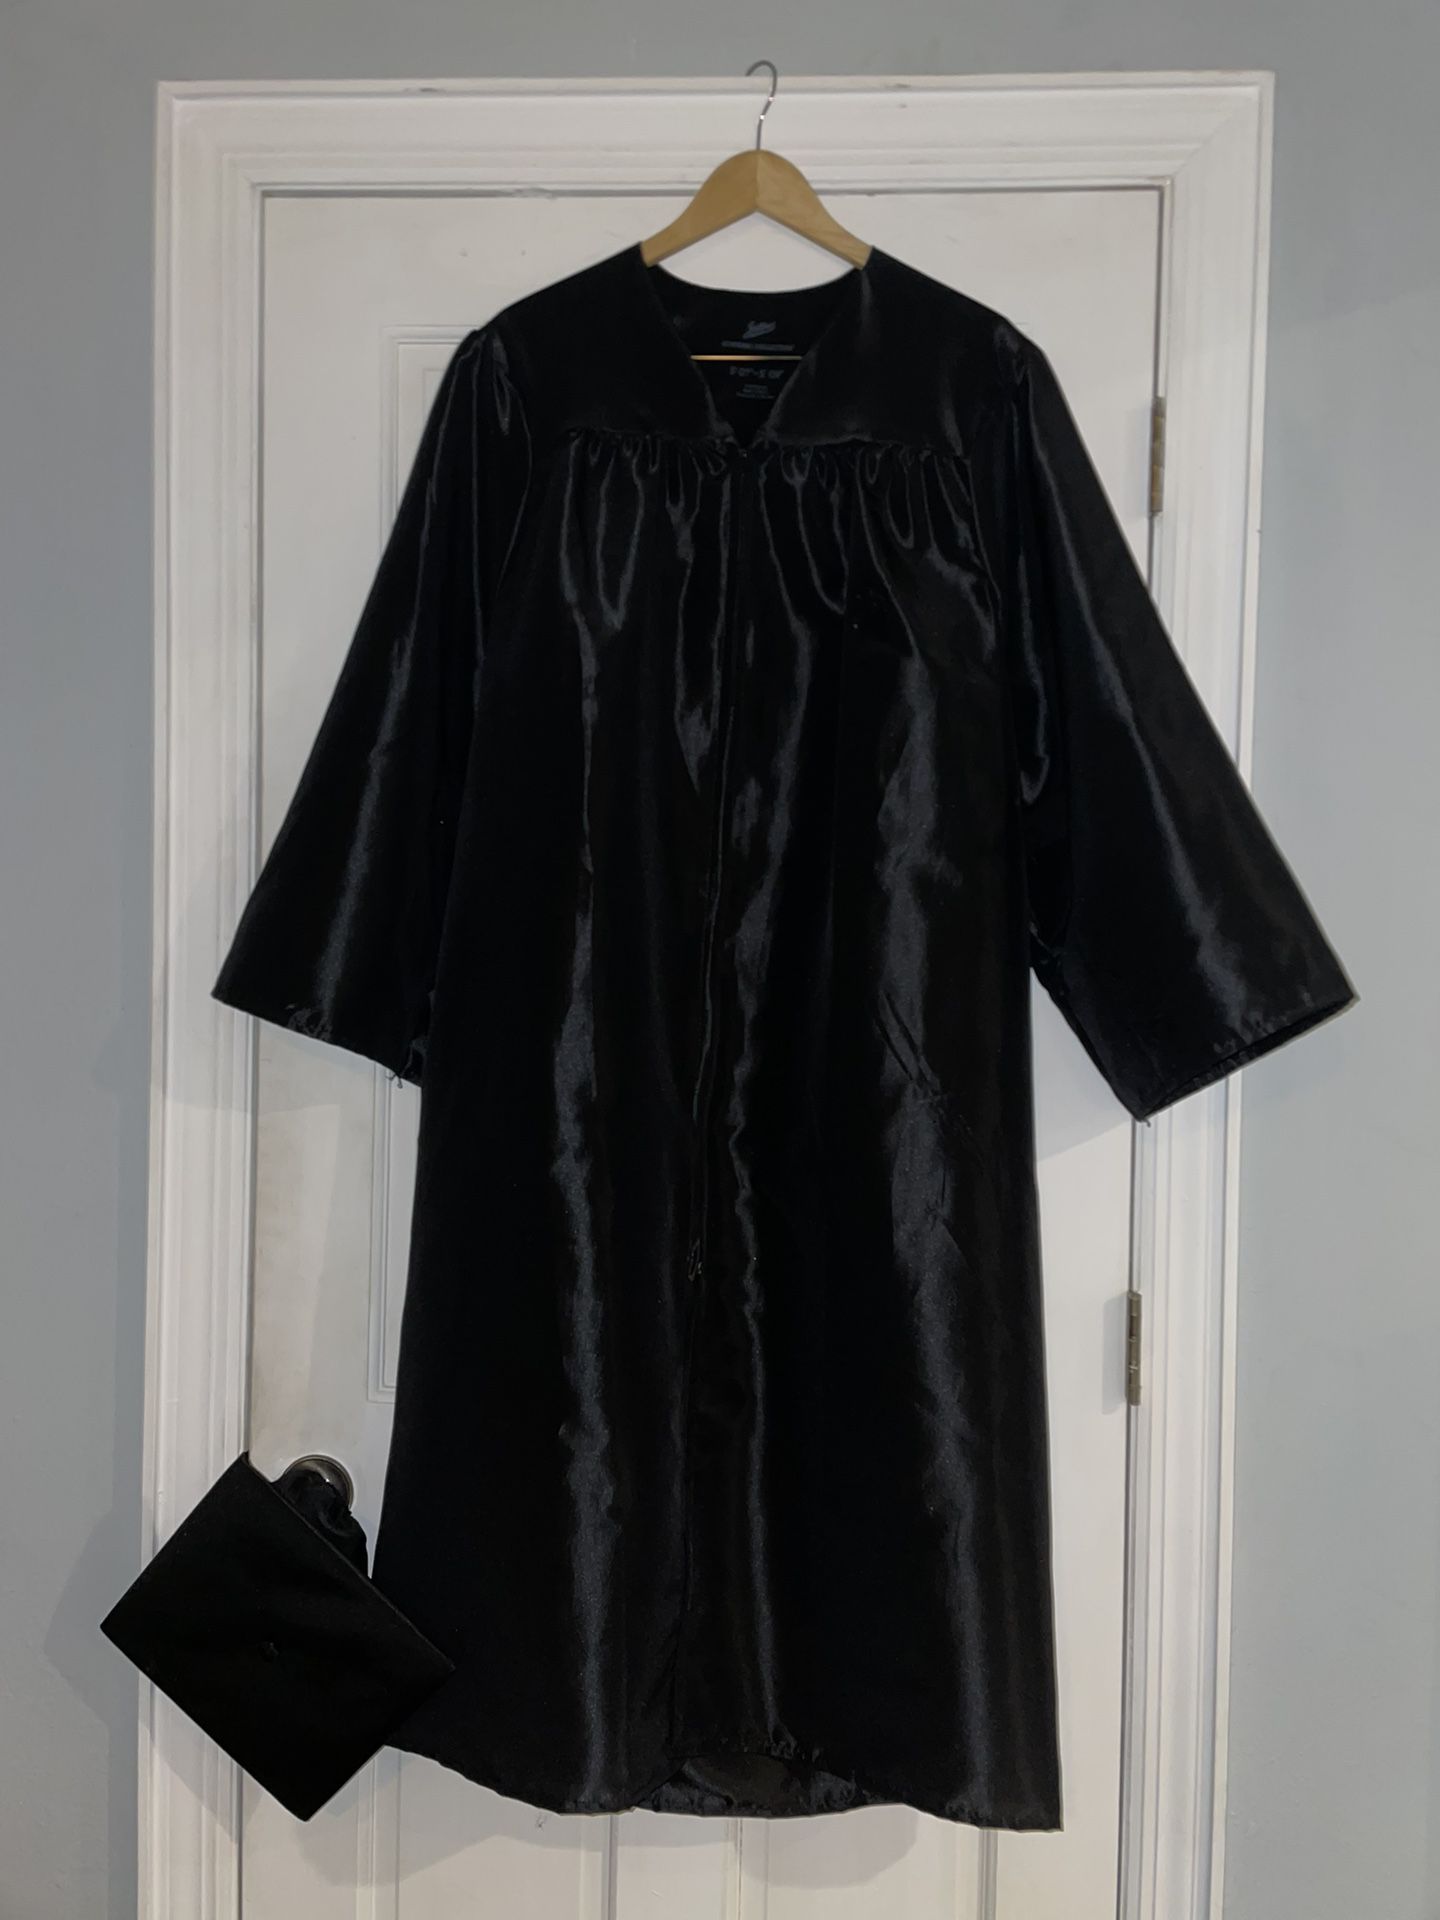 Graduation gown and cap